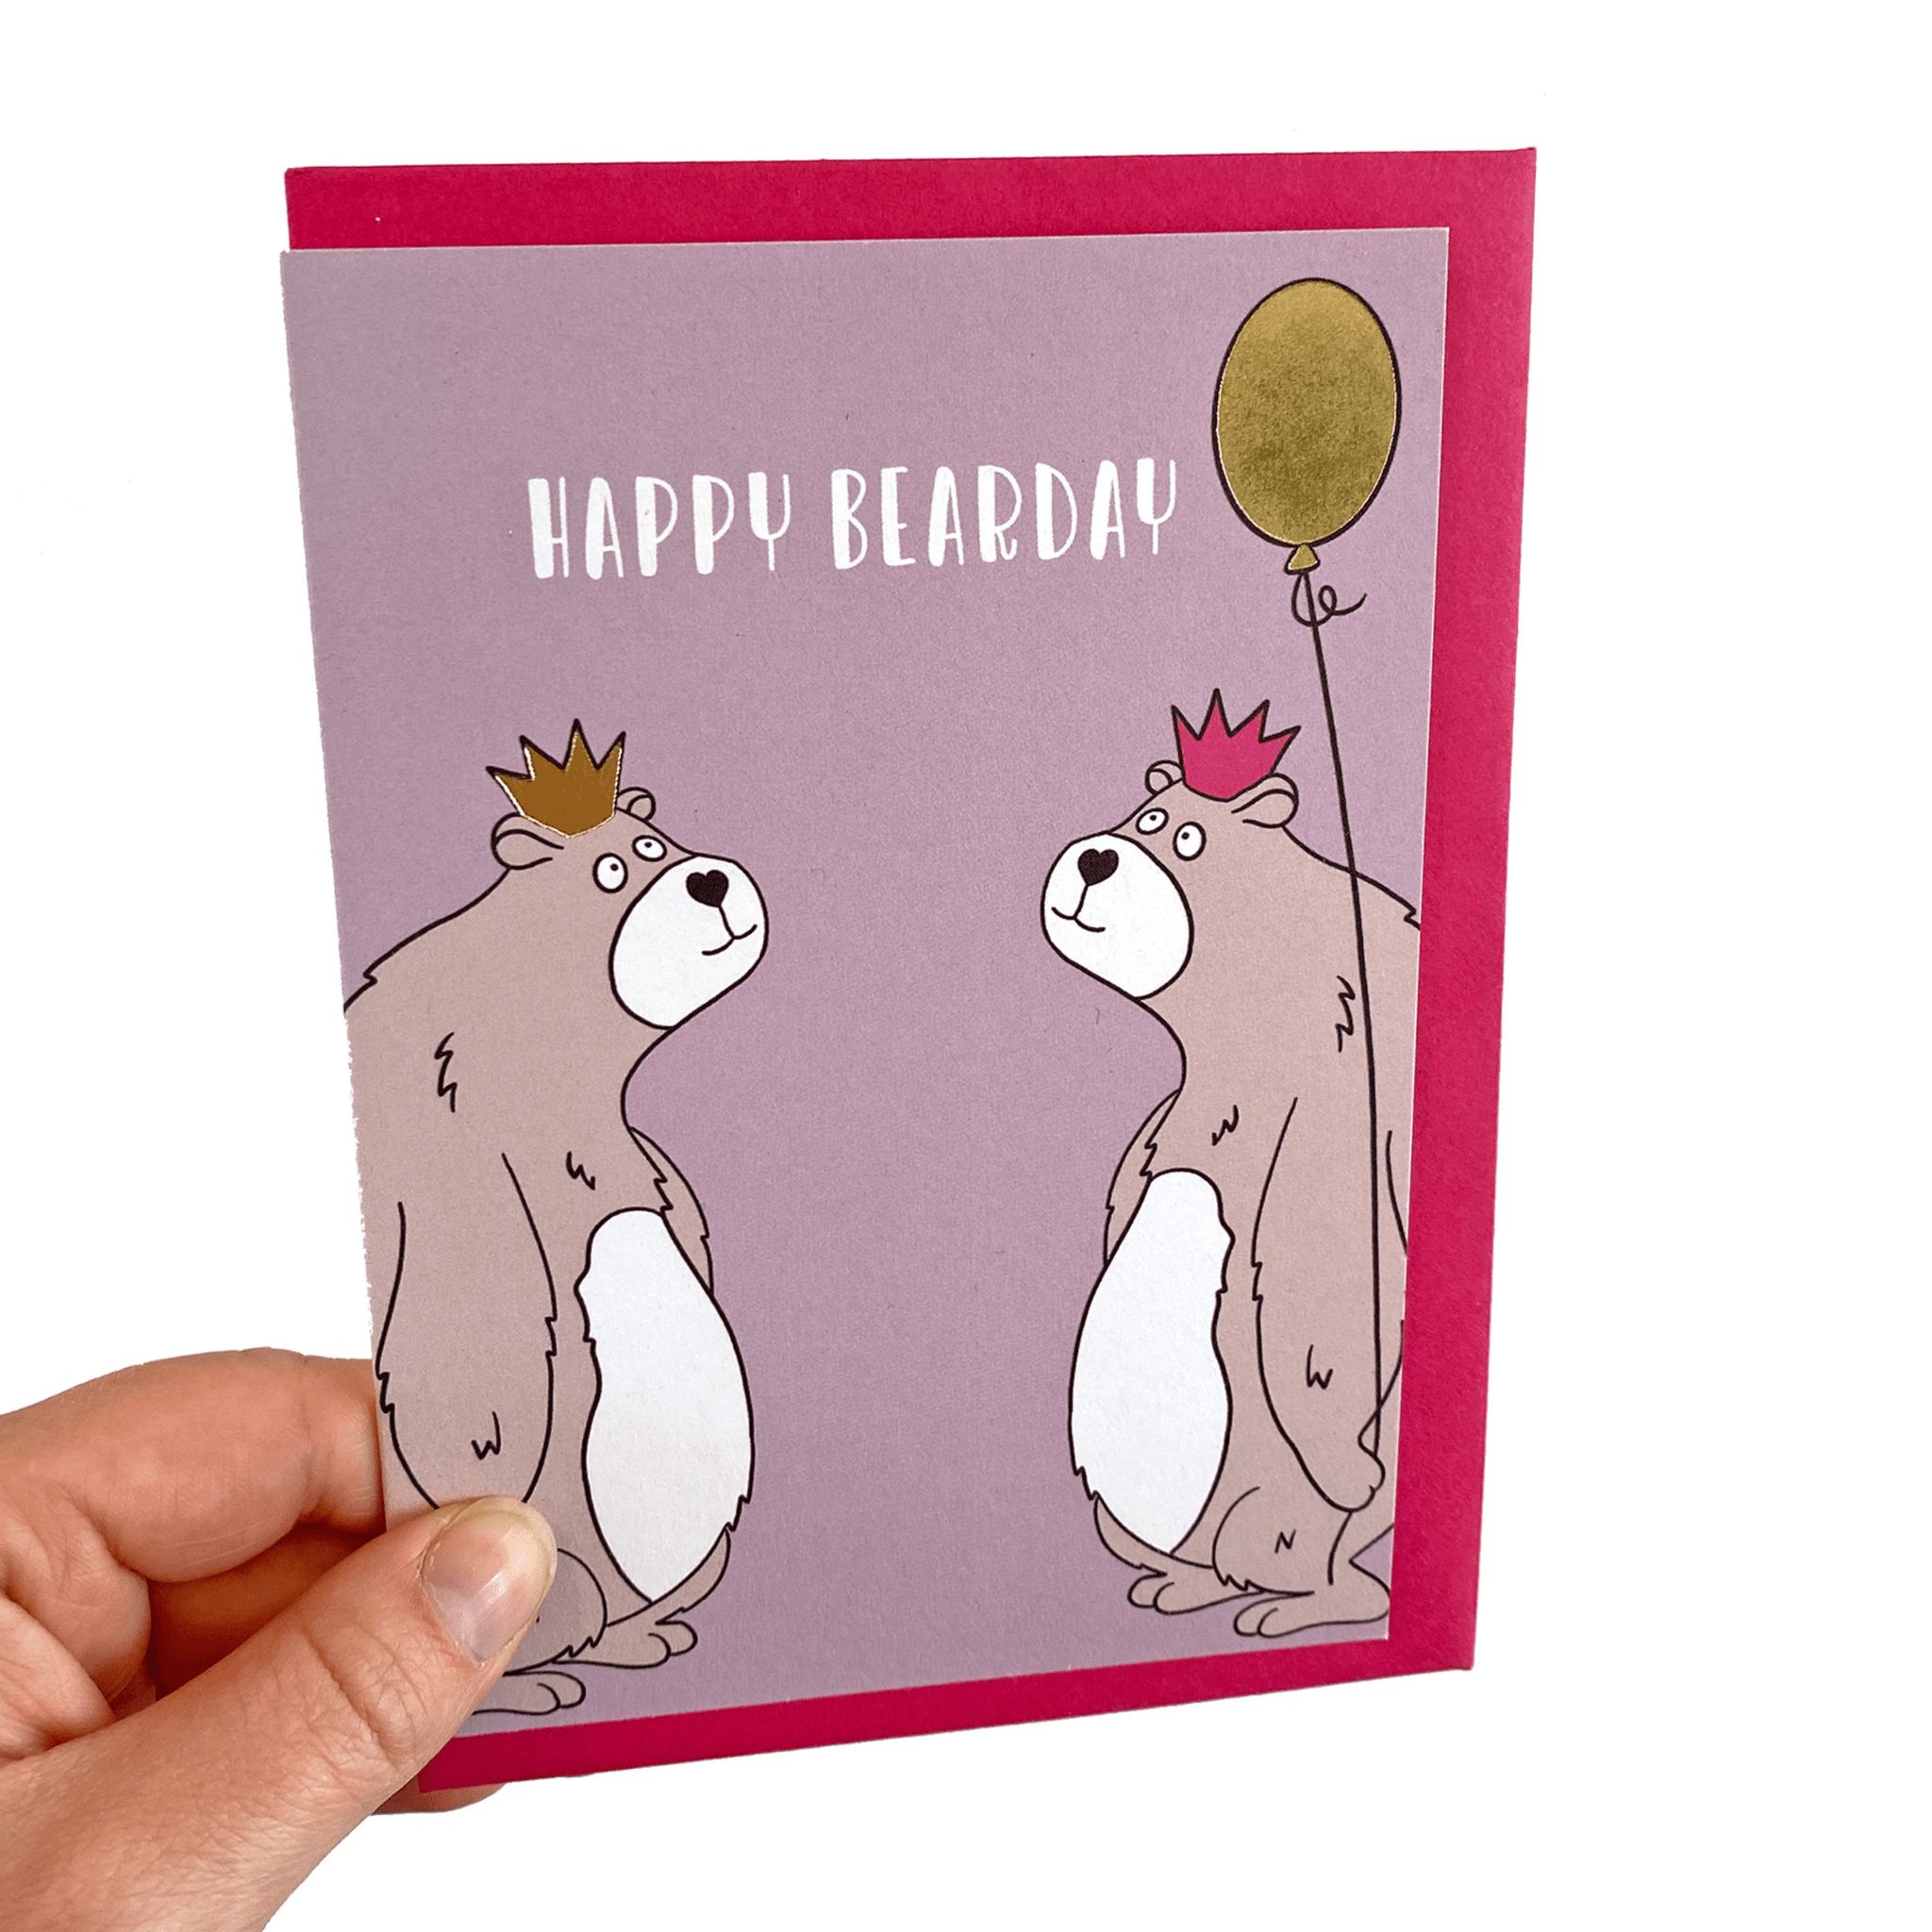 Purple birthday card with two bears and a gold foil balloon